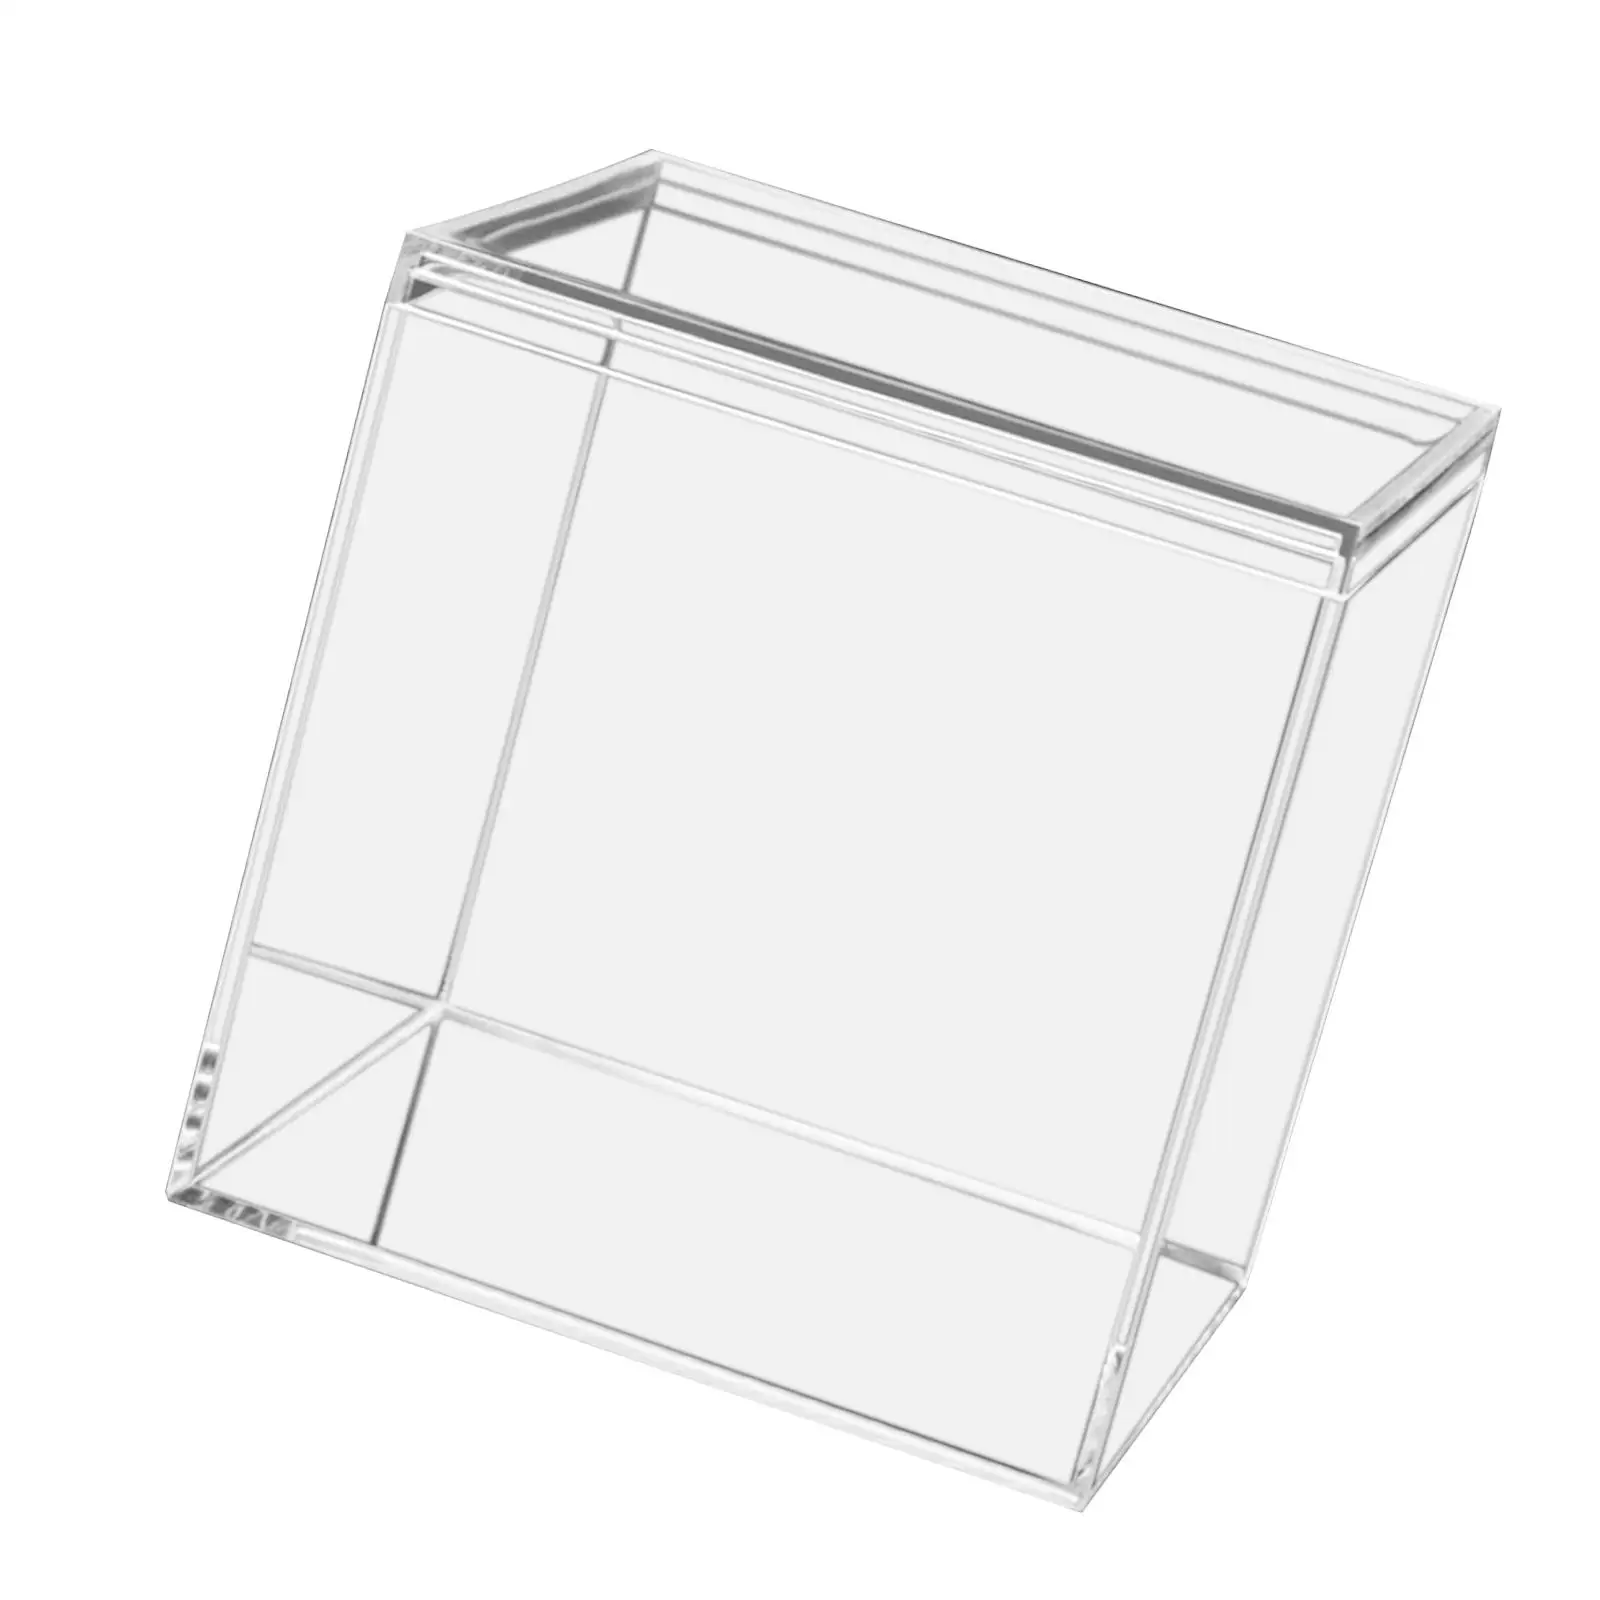 Waterproof  Showcase, Clear Acrylic  Display, Square Containers, for Weddings